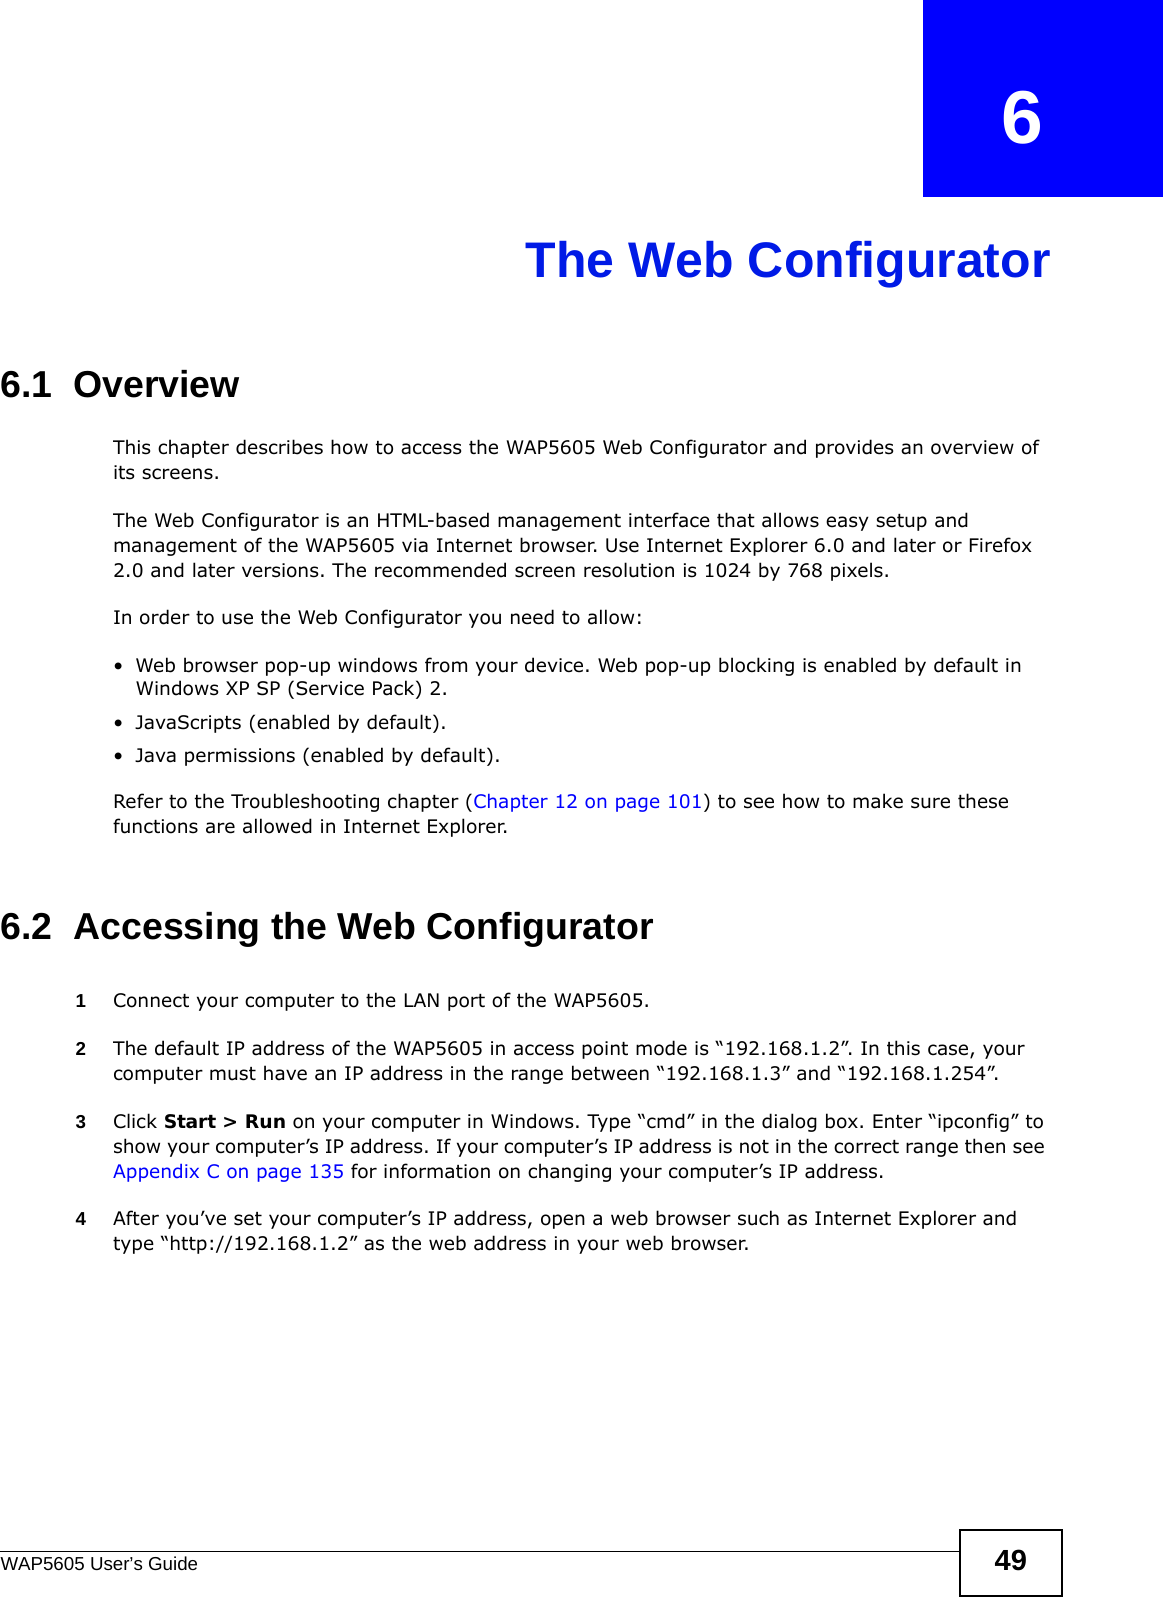 WAP5605 User’s Guide 49CHAPTER   6The Web Configurator6.1  OverviewThis chapter describes how to access the WAP5605 Web Configurator and provides an overview of its screens.The Web Configurator is an HTML-based management interface that allows easy setup and management of the WAP5605 via Internet browser. Use Internet Explorer 6.0 and later or Firefox 2.0 and later versions. The recommended screen resolution is 1024 by 768 pixels.In order to use the Web Configurator you need to allow:• Web browser pop-up windows from your device. Web pop-up blocking is enabled by default in Windows XP SP (Service Pack) 2.• JavaScripts (enabled by default).• Java permissions (enabled by default).Refer to the Troubleshooting chapter (Chapter 12 on page 101) to see how to make sure these functions are allowed in Internet Explorer.6.2  Accessing the Web Configurator 1Connect your computer to the LAN port of the WAP5605. 2The default IP address of the WAP5605 in access point mode is “192.168.1.2”. In this case, your computer must have an IP address in the range between “192.168.1.3” and “192.168.1.254”.3Click Start &gt; Run on your computer in Windows. Type “cmd” in the dialog box. Enter “ipconfig” to show your computer’s IP address. If your computer’s IP address is not in the correct range then see Appendix C on page 135 for information on changing your computer’s IP address.4After you’ve set your computer’s IP address, open a web browser such as Internet Explorer and type “http://192.168.1.2” as the web address in your web browser.